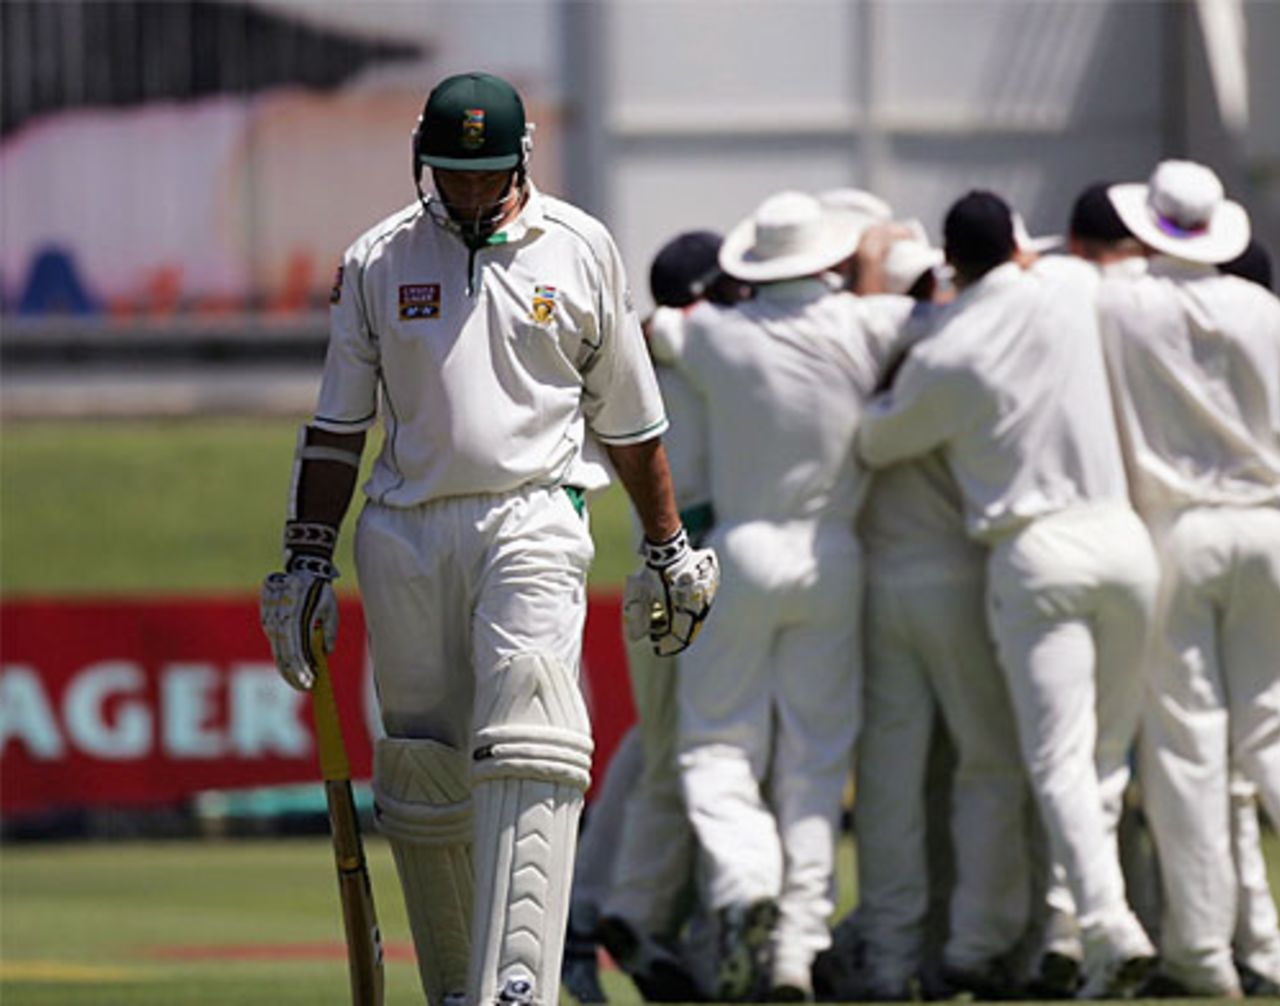 A disconsolate Graeme Smith trudges off after being dismissed for a second-ball duck, South Africa v England, 1st Test, Port Elizabeth, December 17, 2004